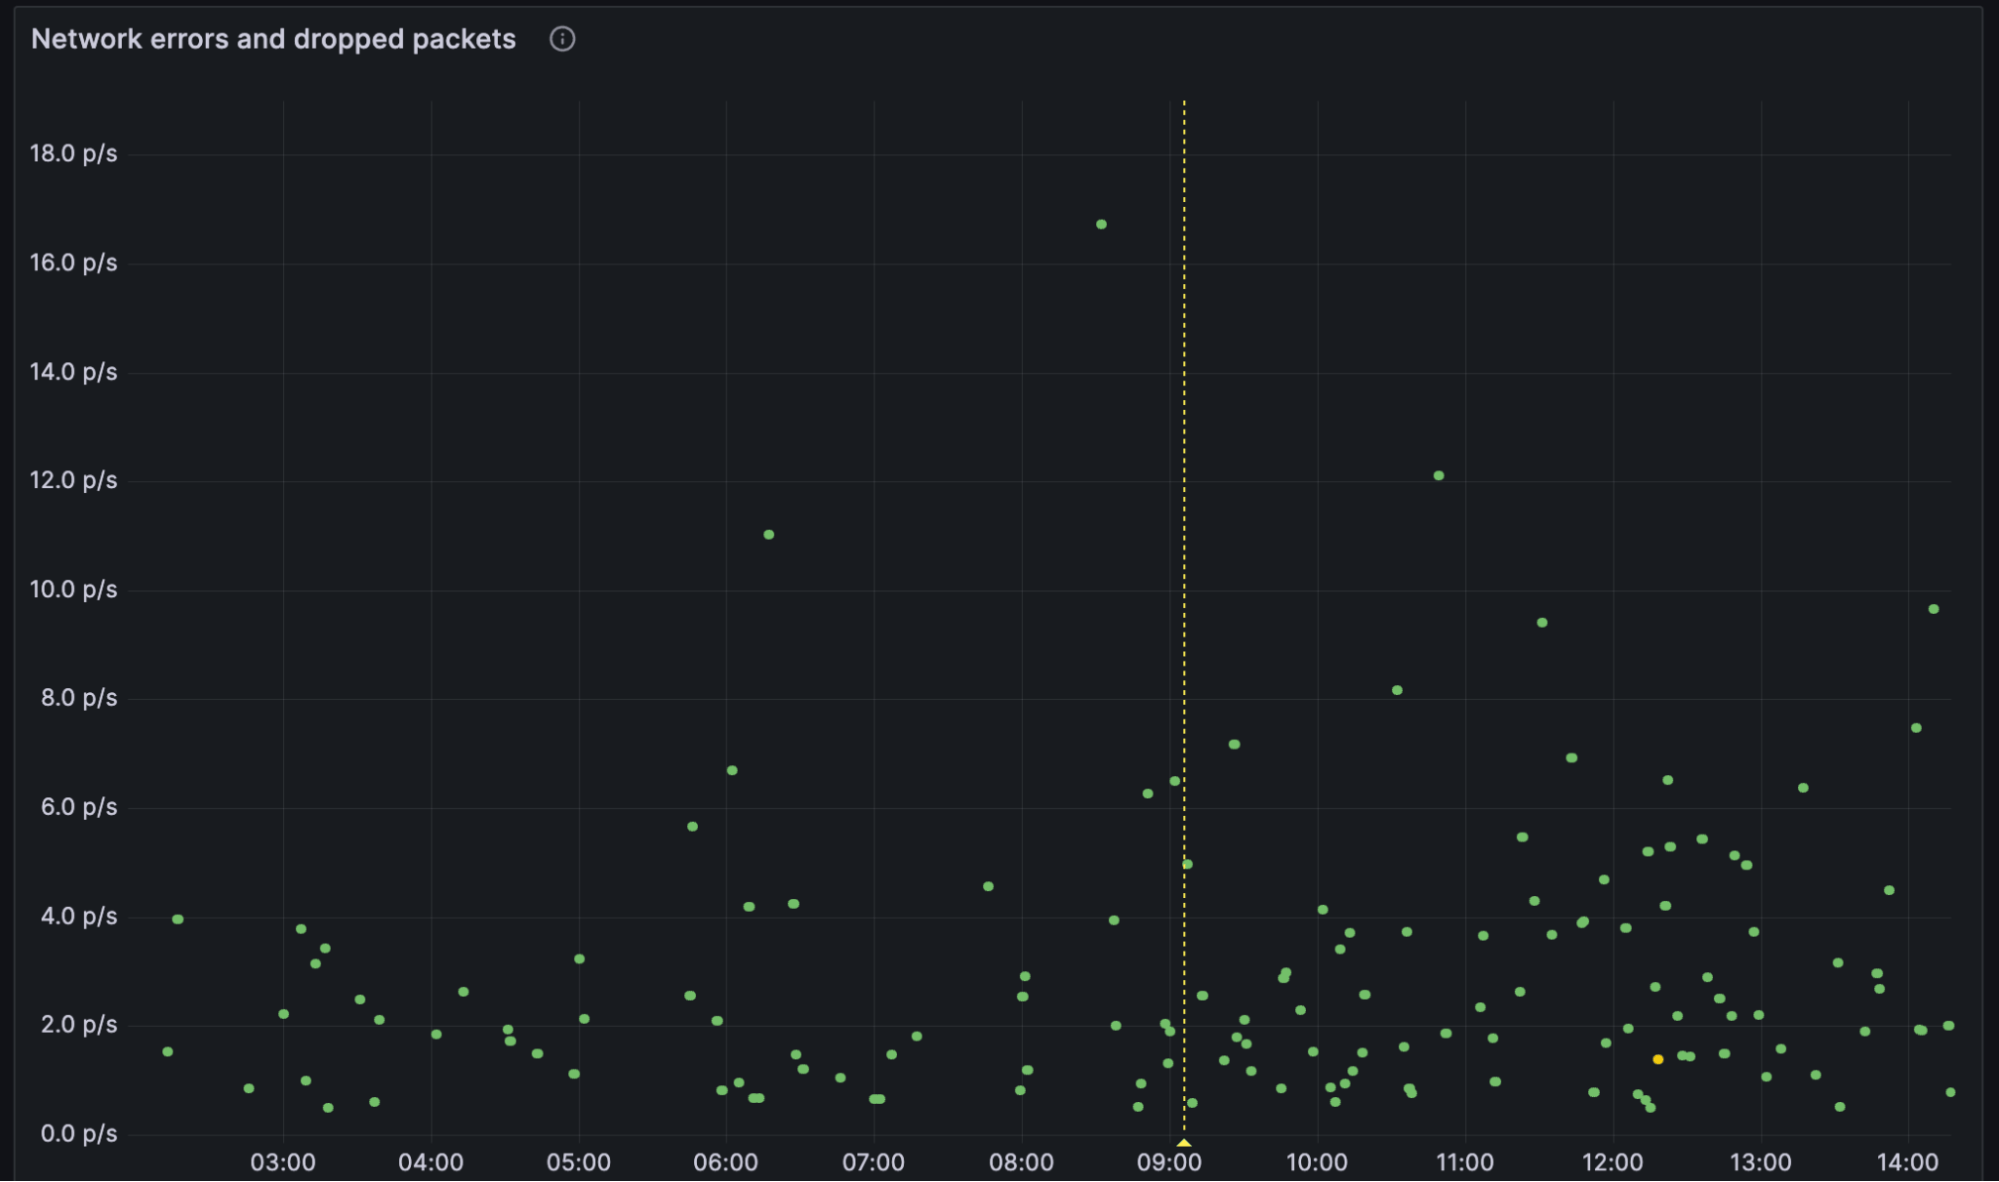 A Grafana dashboard for network errors and dropped packets